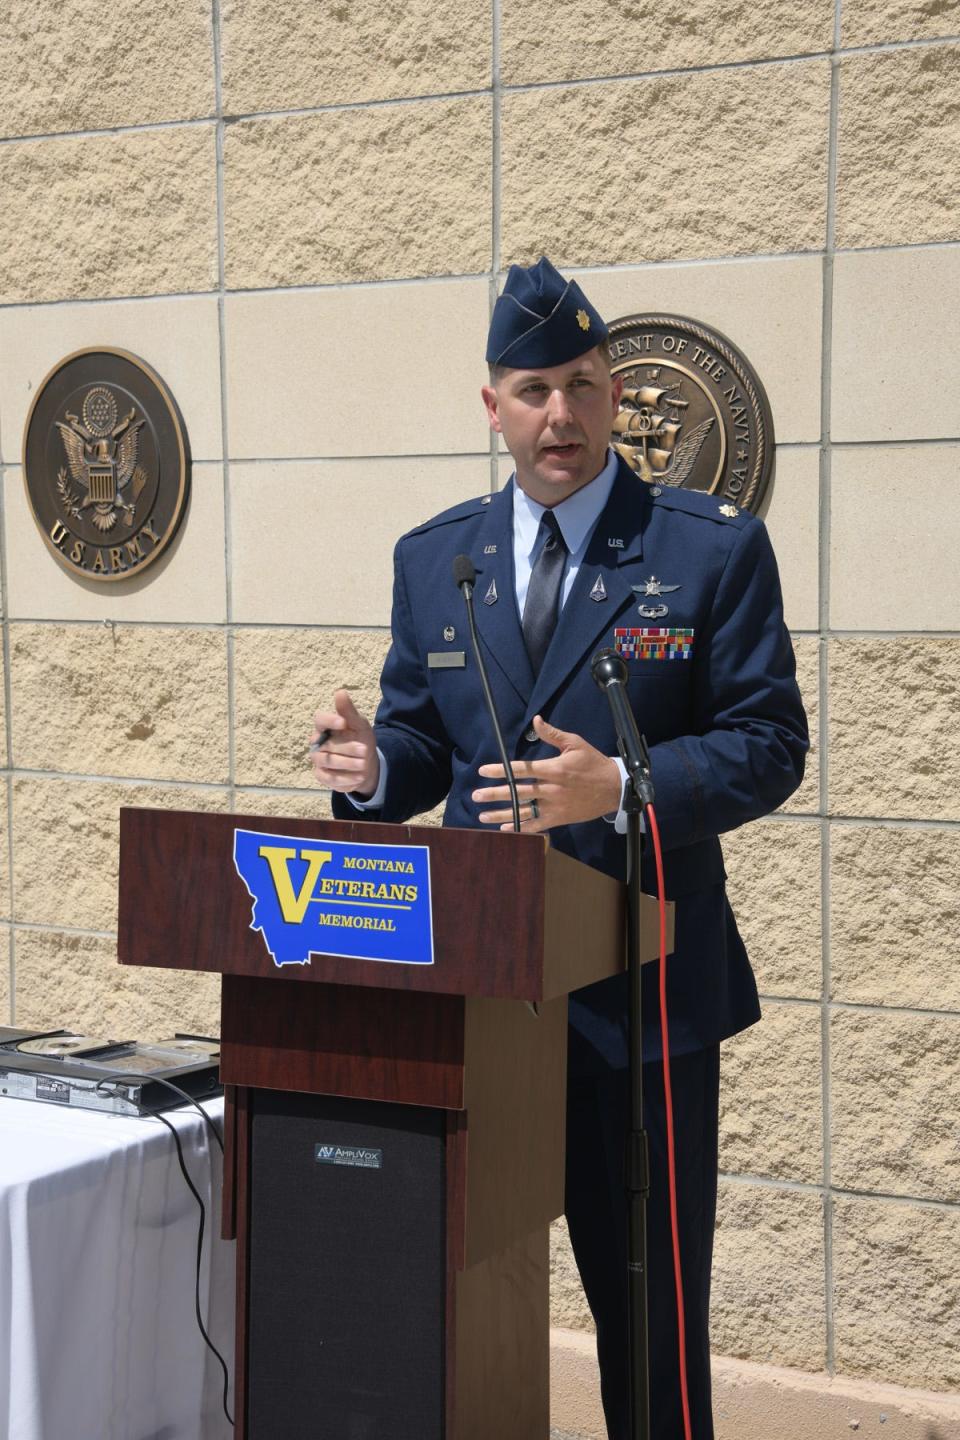 Space Force Maj. Jared Myers provided his remarks on serving as the commander of Detachment 1 of the 22nd Space Operations Squadron at Malmstrom Air Force Base during the United States Space Force emblem unveiling ceremony held at the Montana Veterans Memorial on June 27, 2023.